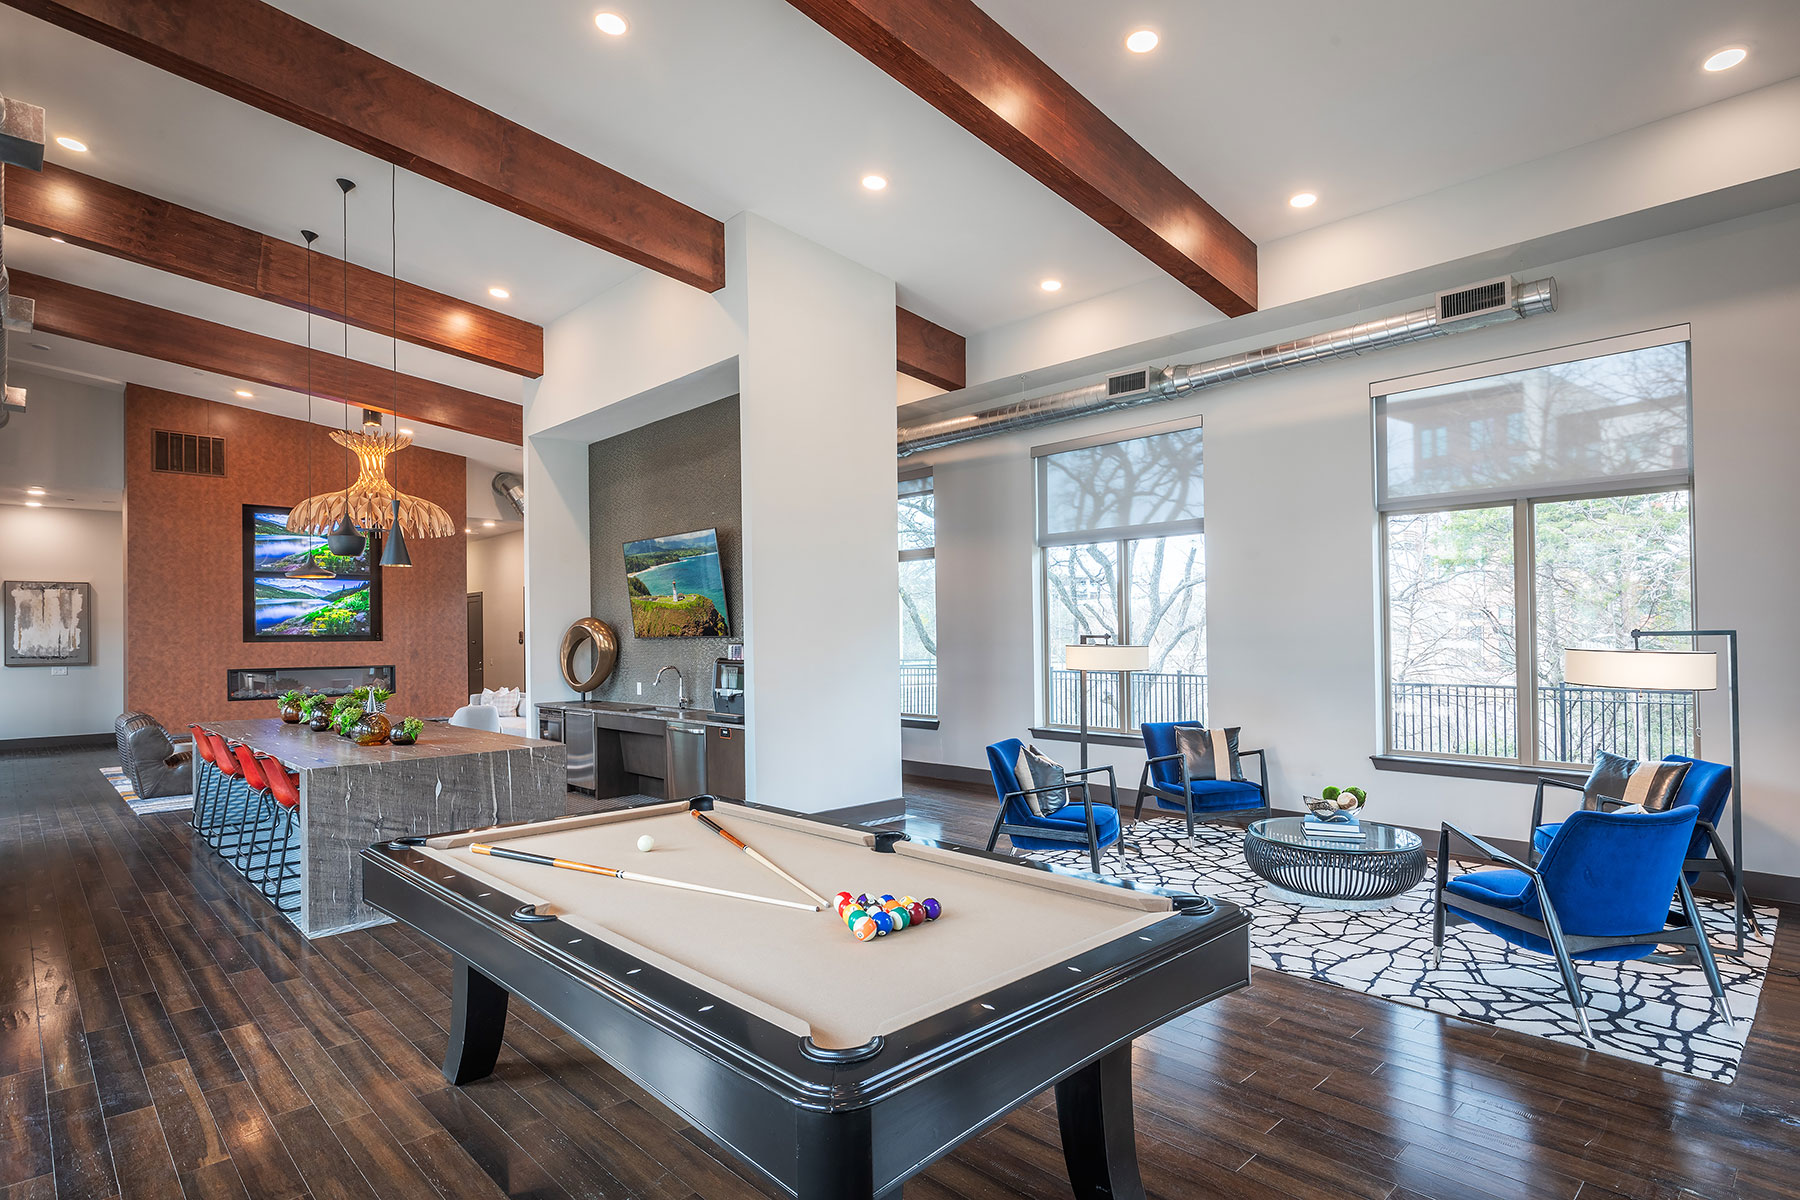 Clubhouse interior with view of bar seating, kitchen area, billiards table and several wall mounted TVs